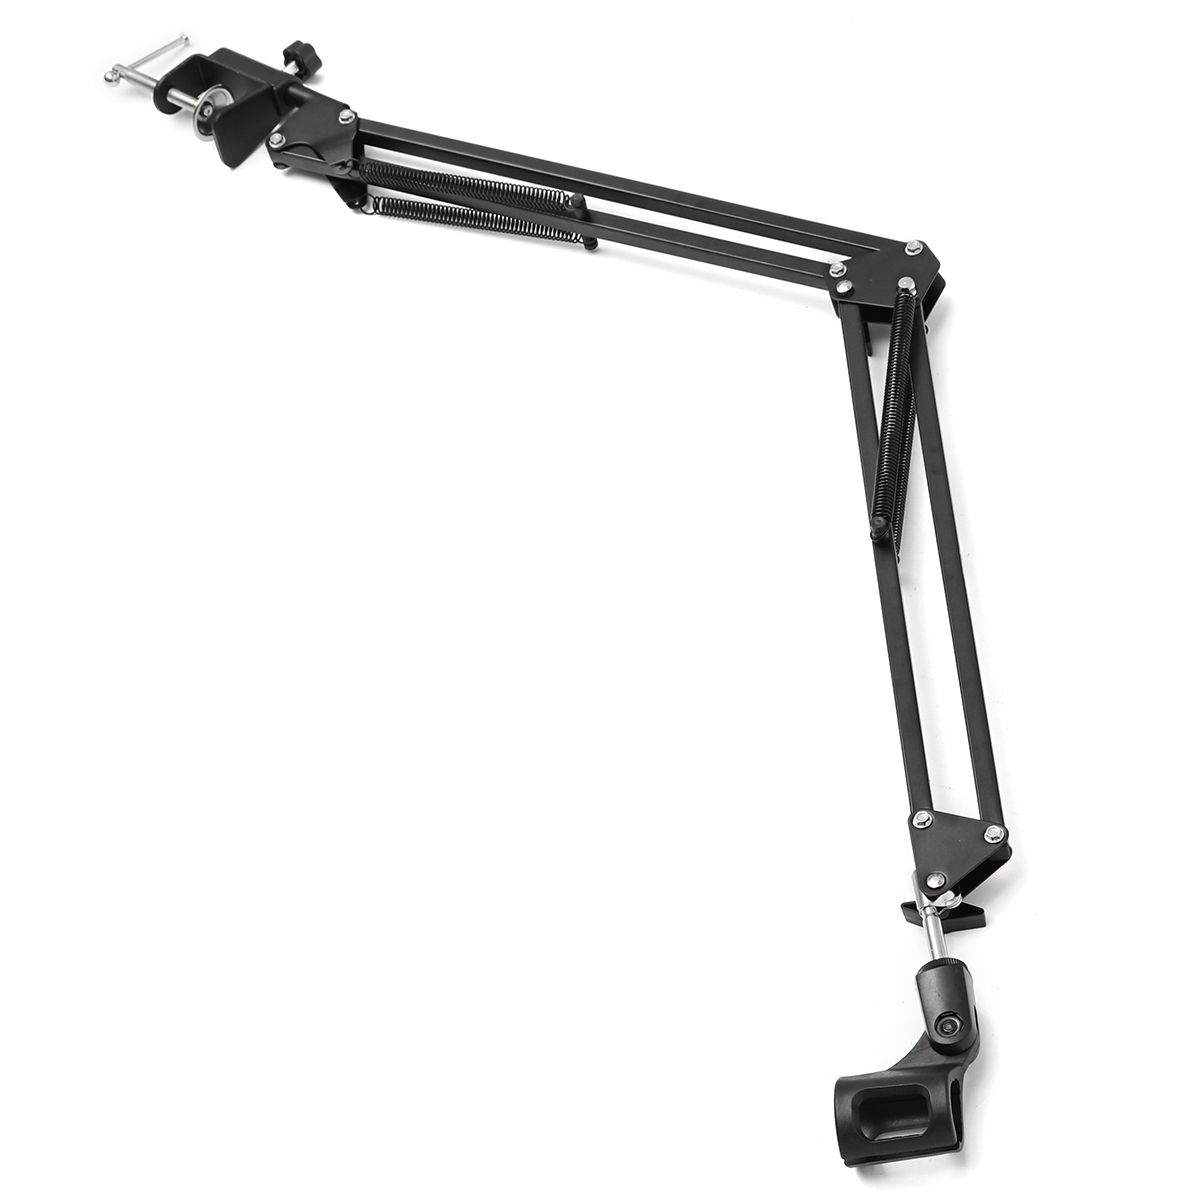 PSA1-Studio-Microphone-Boom-Arm-Stands-Suspension-Table-Mount-Frame-Holders-1439191